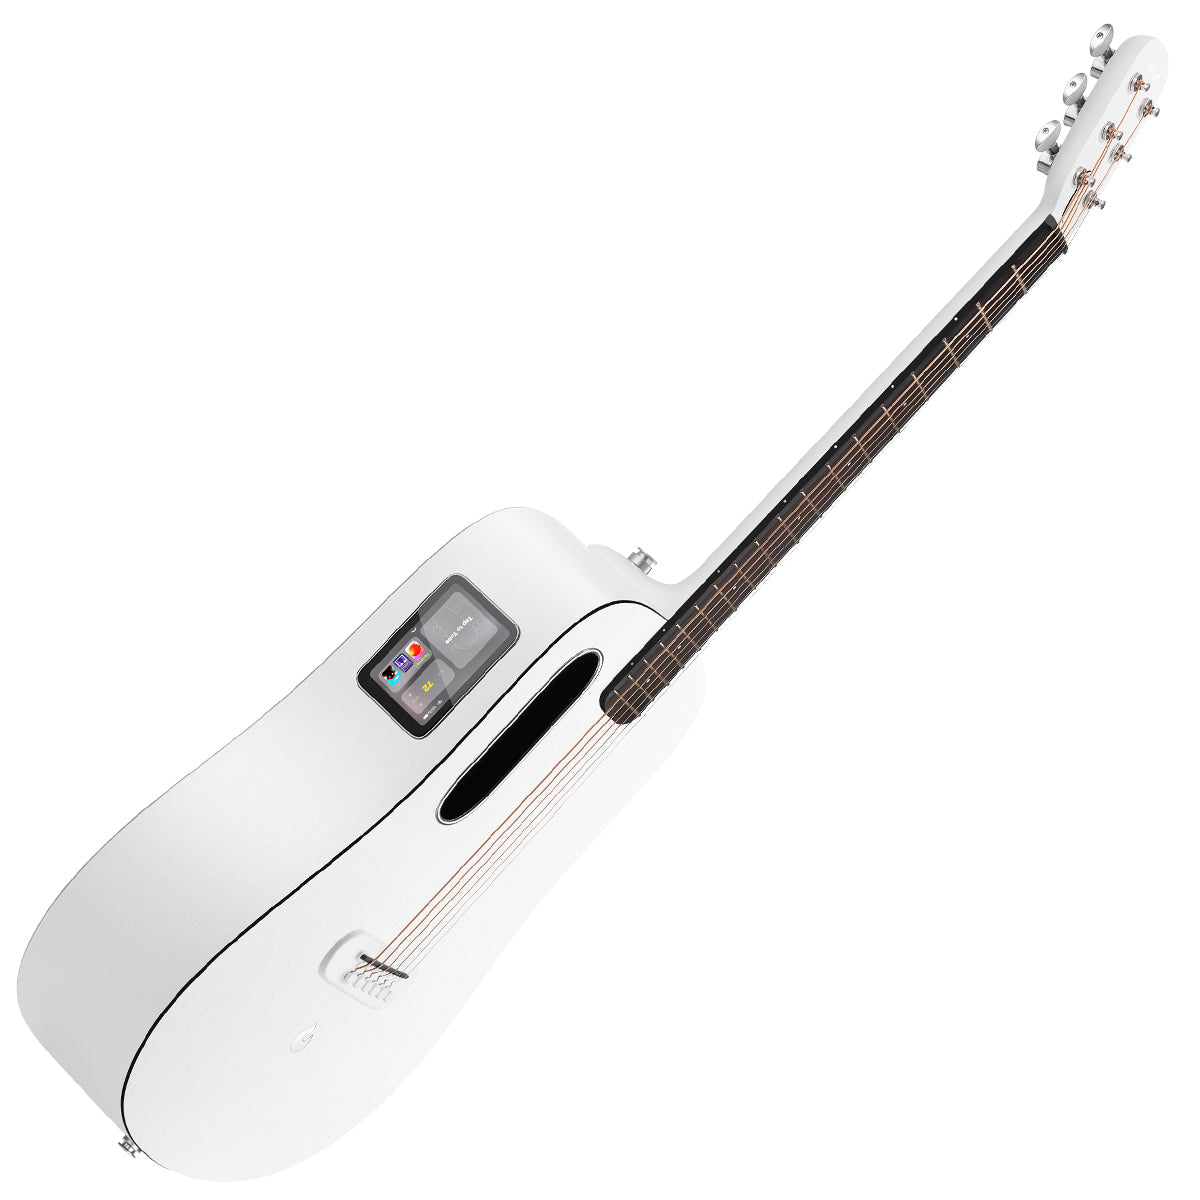 LAVA ME PLAY 36" with Lite Bag ~ Frost White, Acoustic Guitar for sale at Richards Guitars.